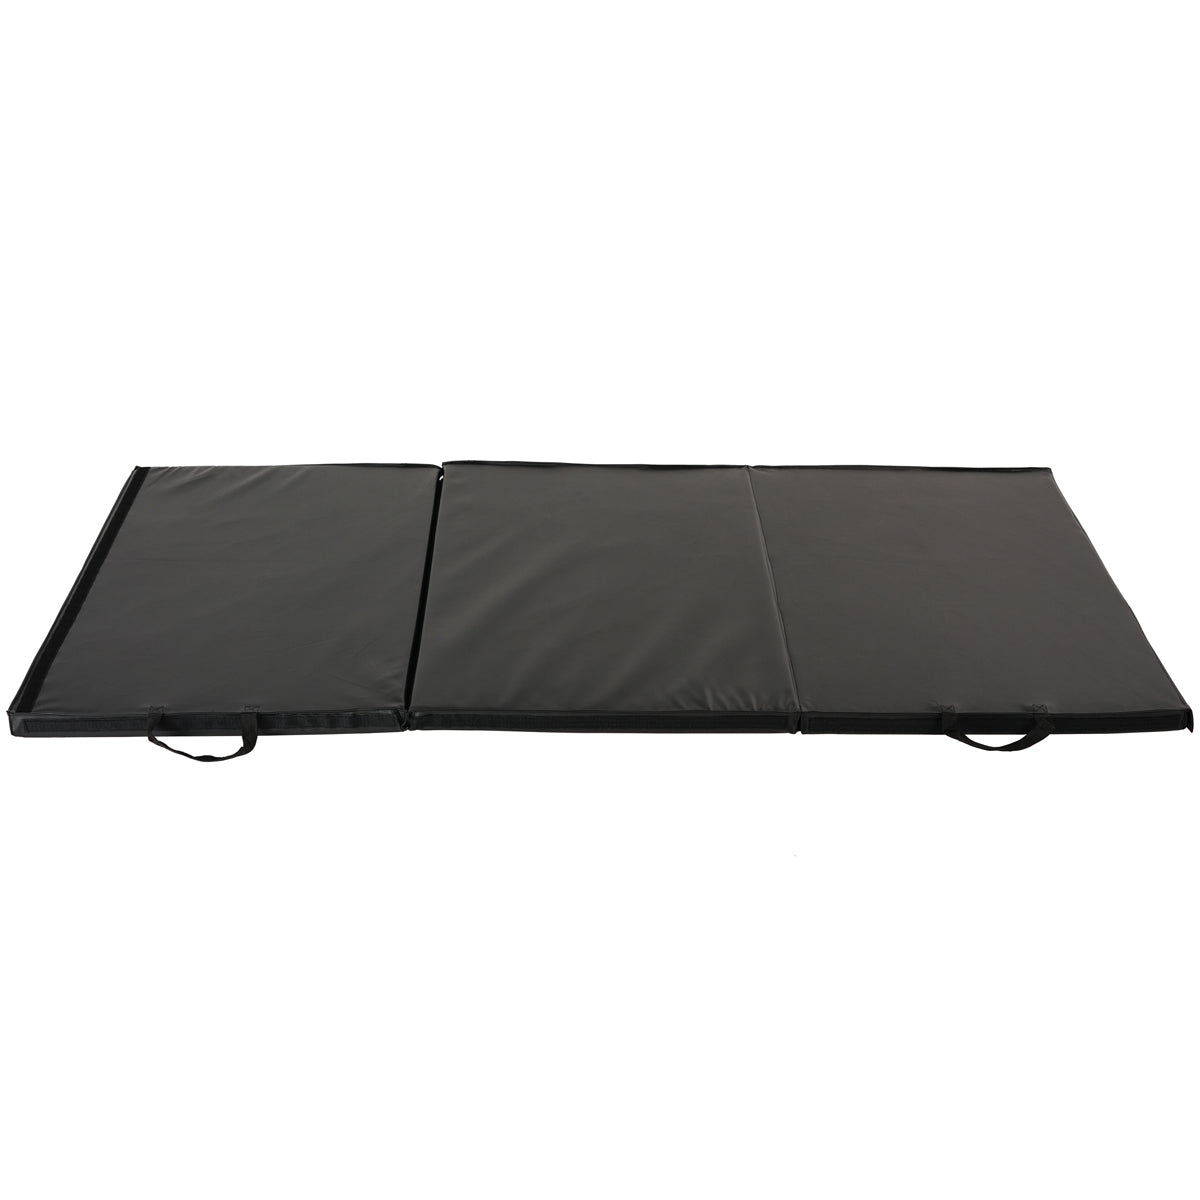 Sunny Health & Fitness Home Gym Foam Floor Protector Mat for Fitness &  Exercise Equipment - Available in 4 Size Options